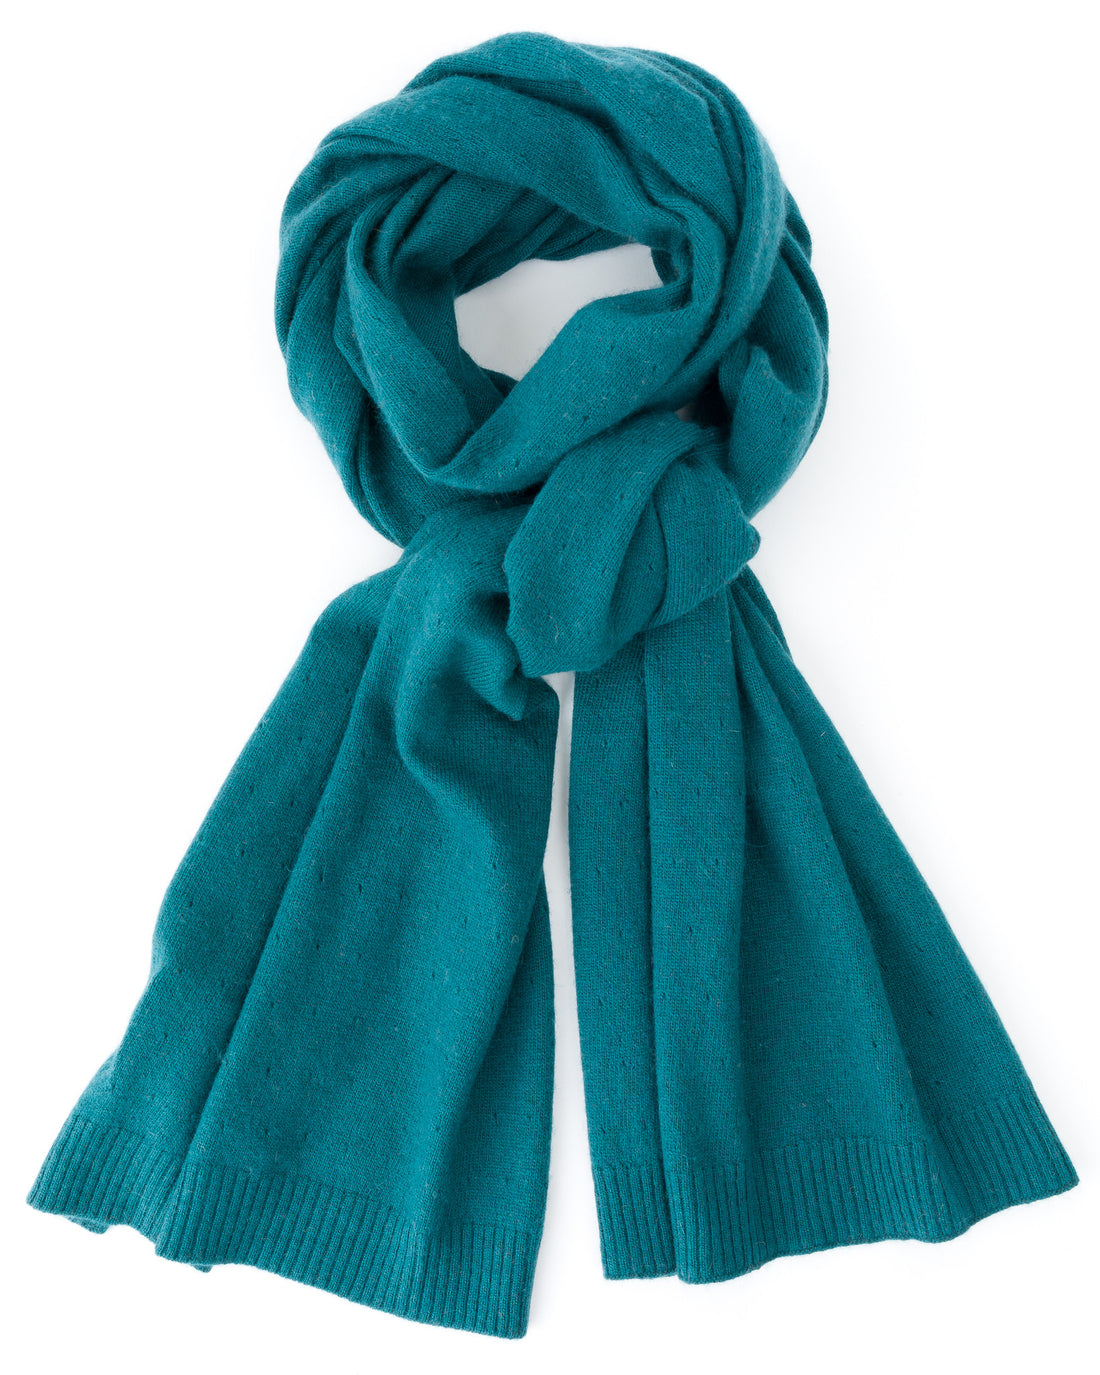 ACCESSORIES - Scarf